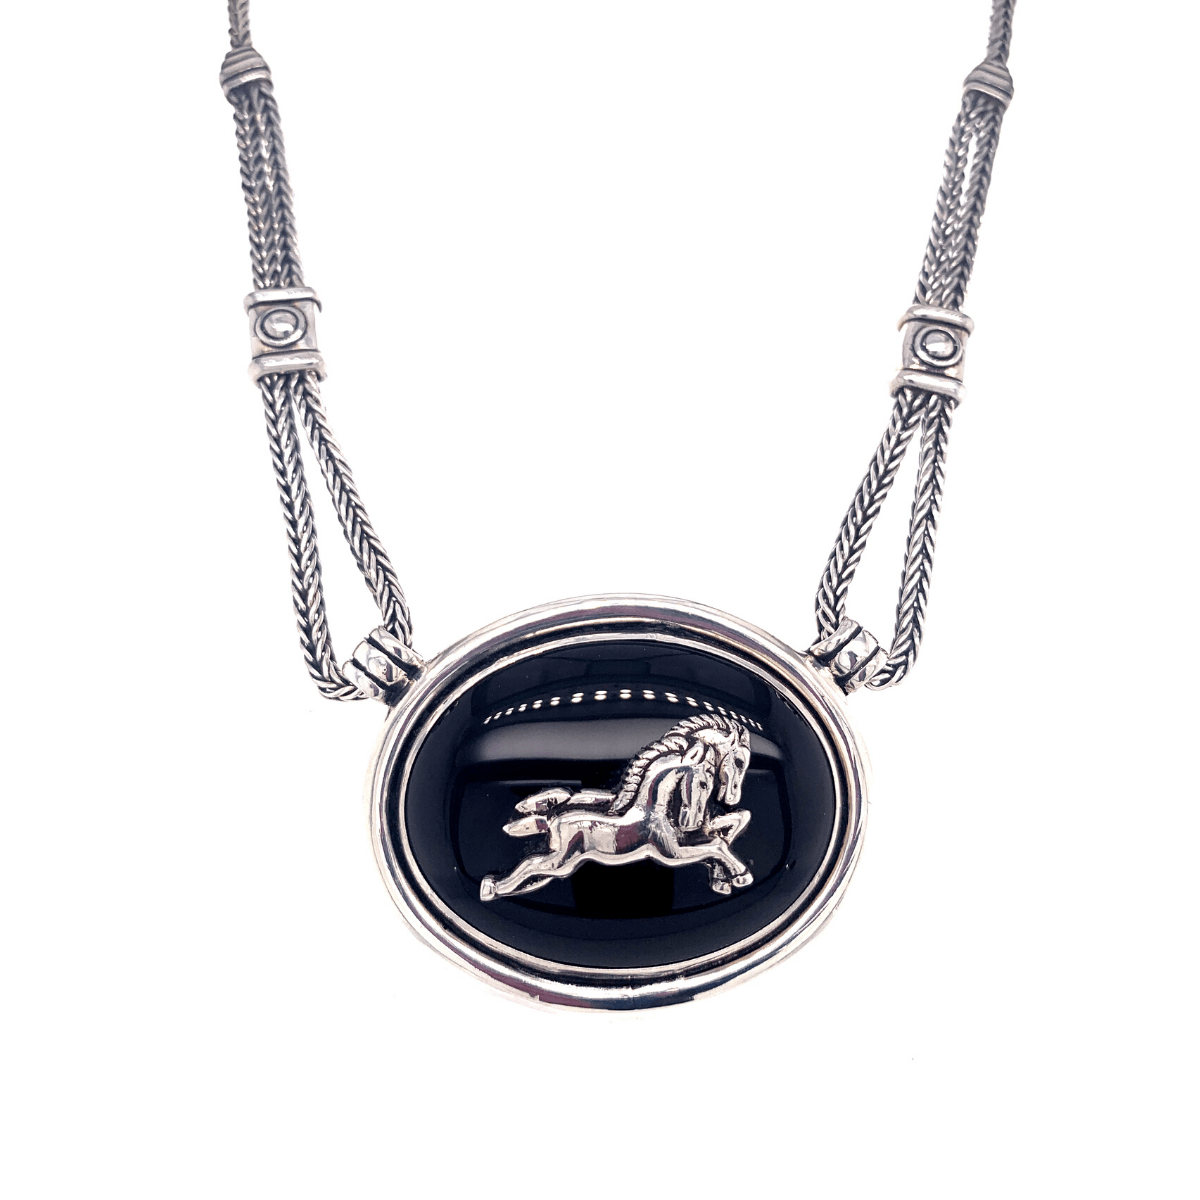 Horses Black Onyx Medallion & Sterling Silver Necklace - Qinti - The Peruvian Shop